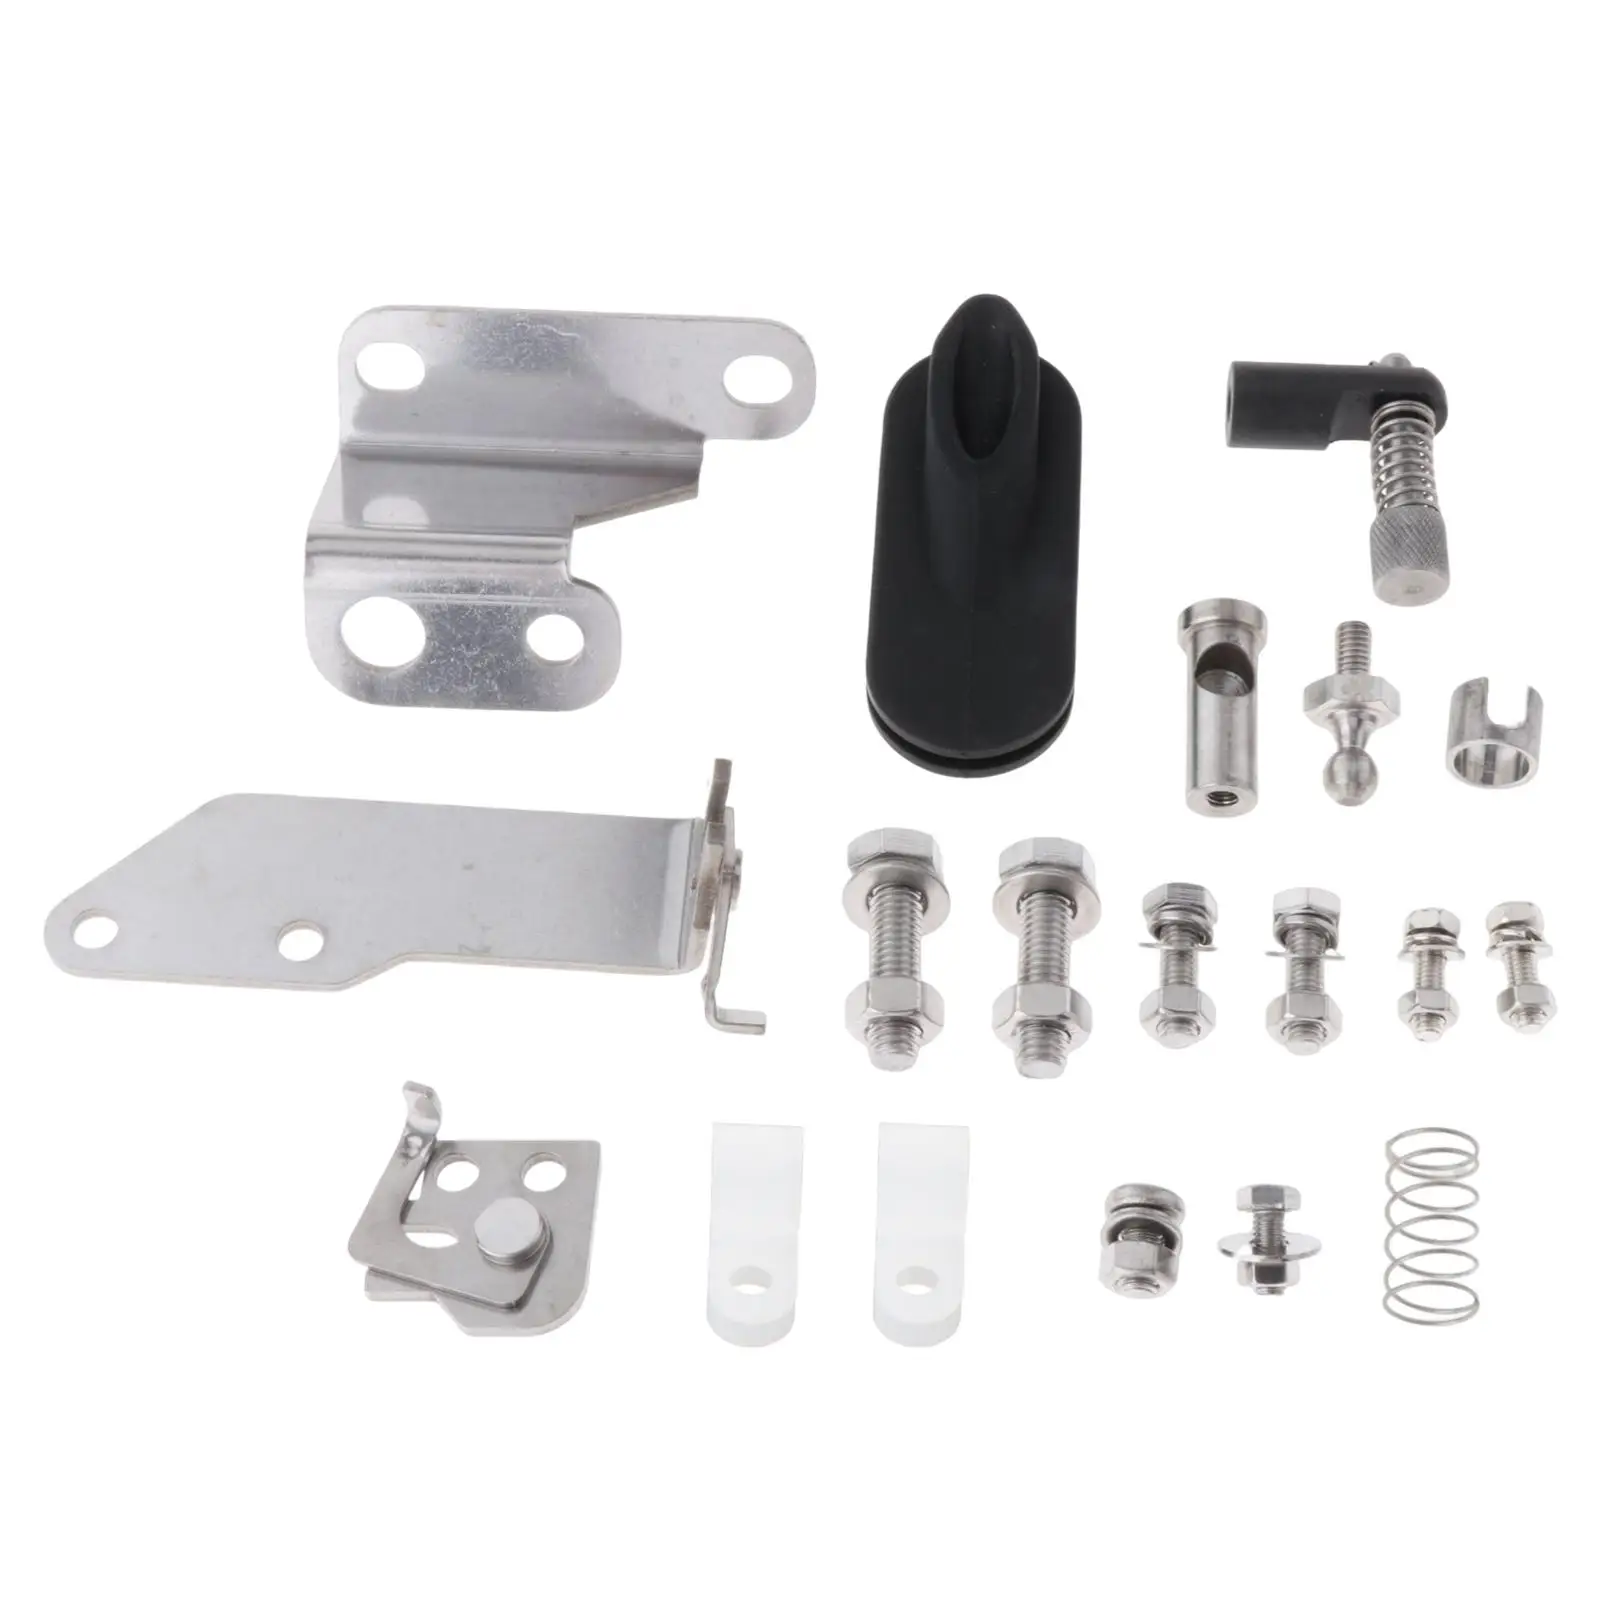 Remote Control Fitting Kit 3A1-83880-1 for Tohatsu Outboard Motor Direct Replaces